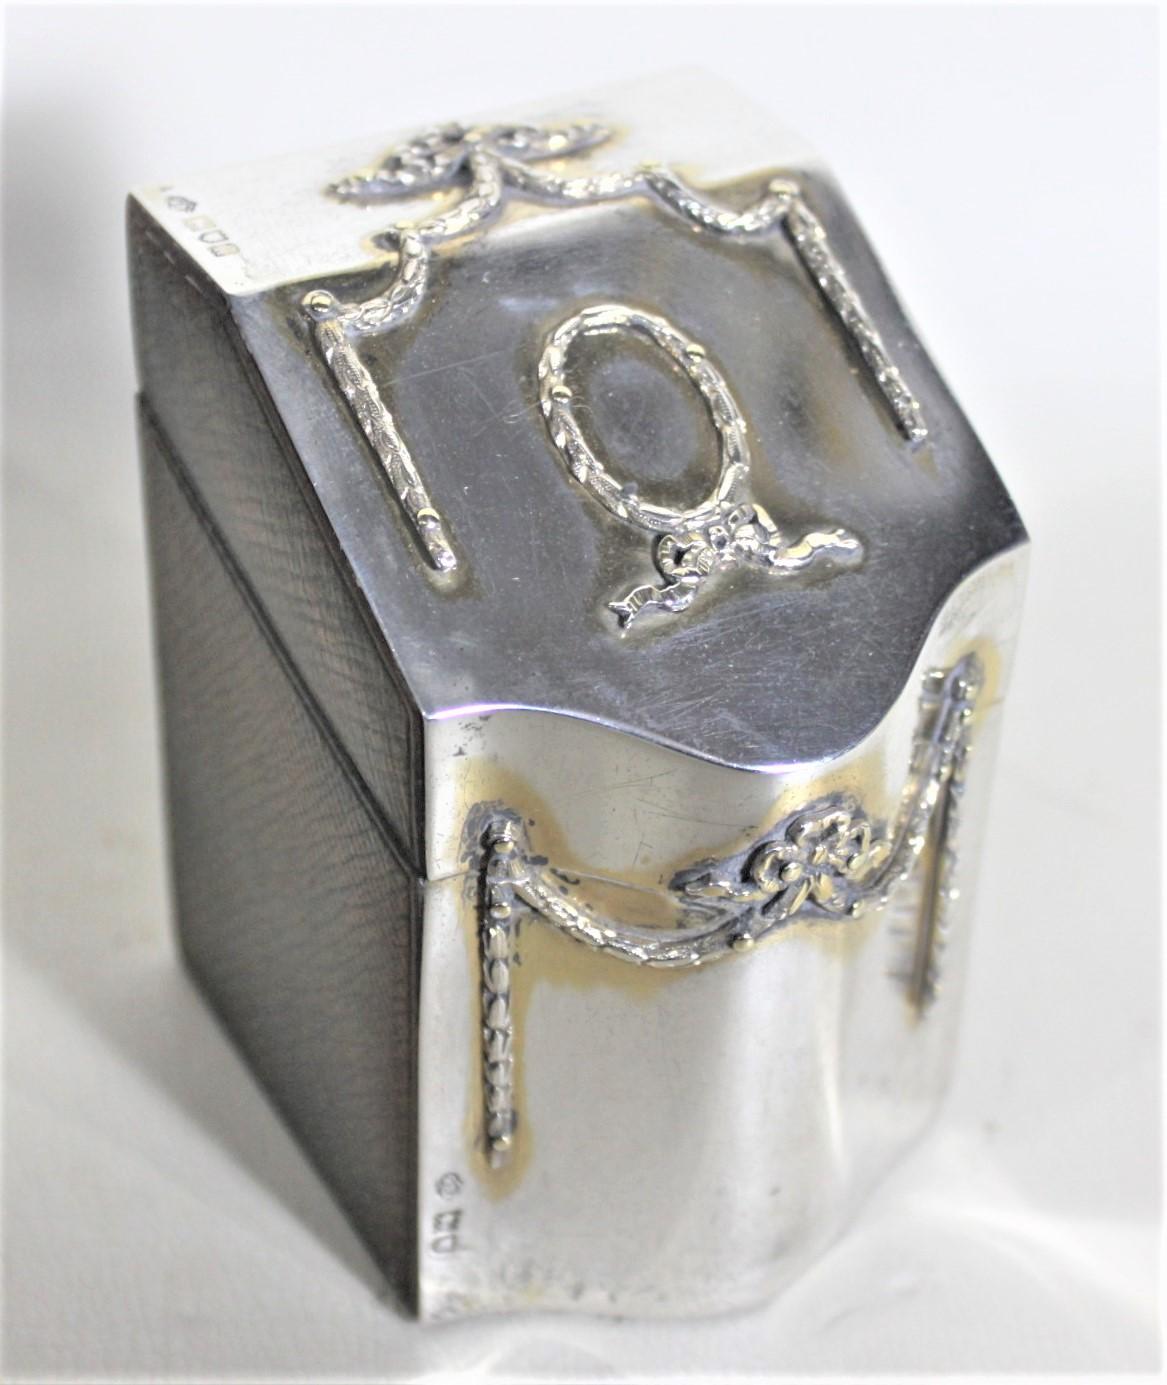 This antique sterling silver and leather playing card box was made in London, England is 1885 by an unknown maker, in a period Victorian style. The box is styled as a miniature knife box with a hinged top and partition in the bottom making two